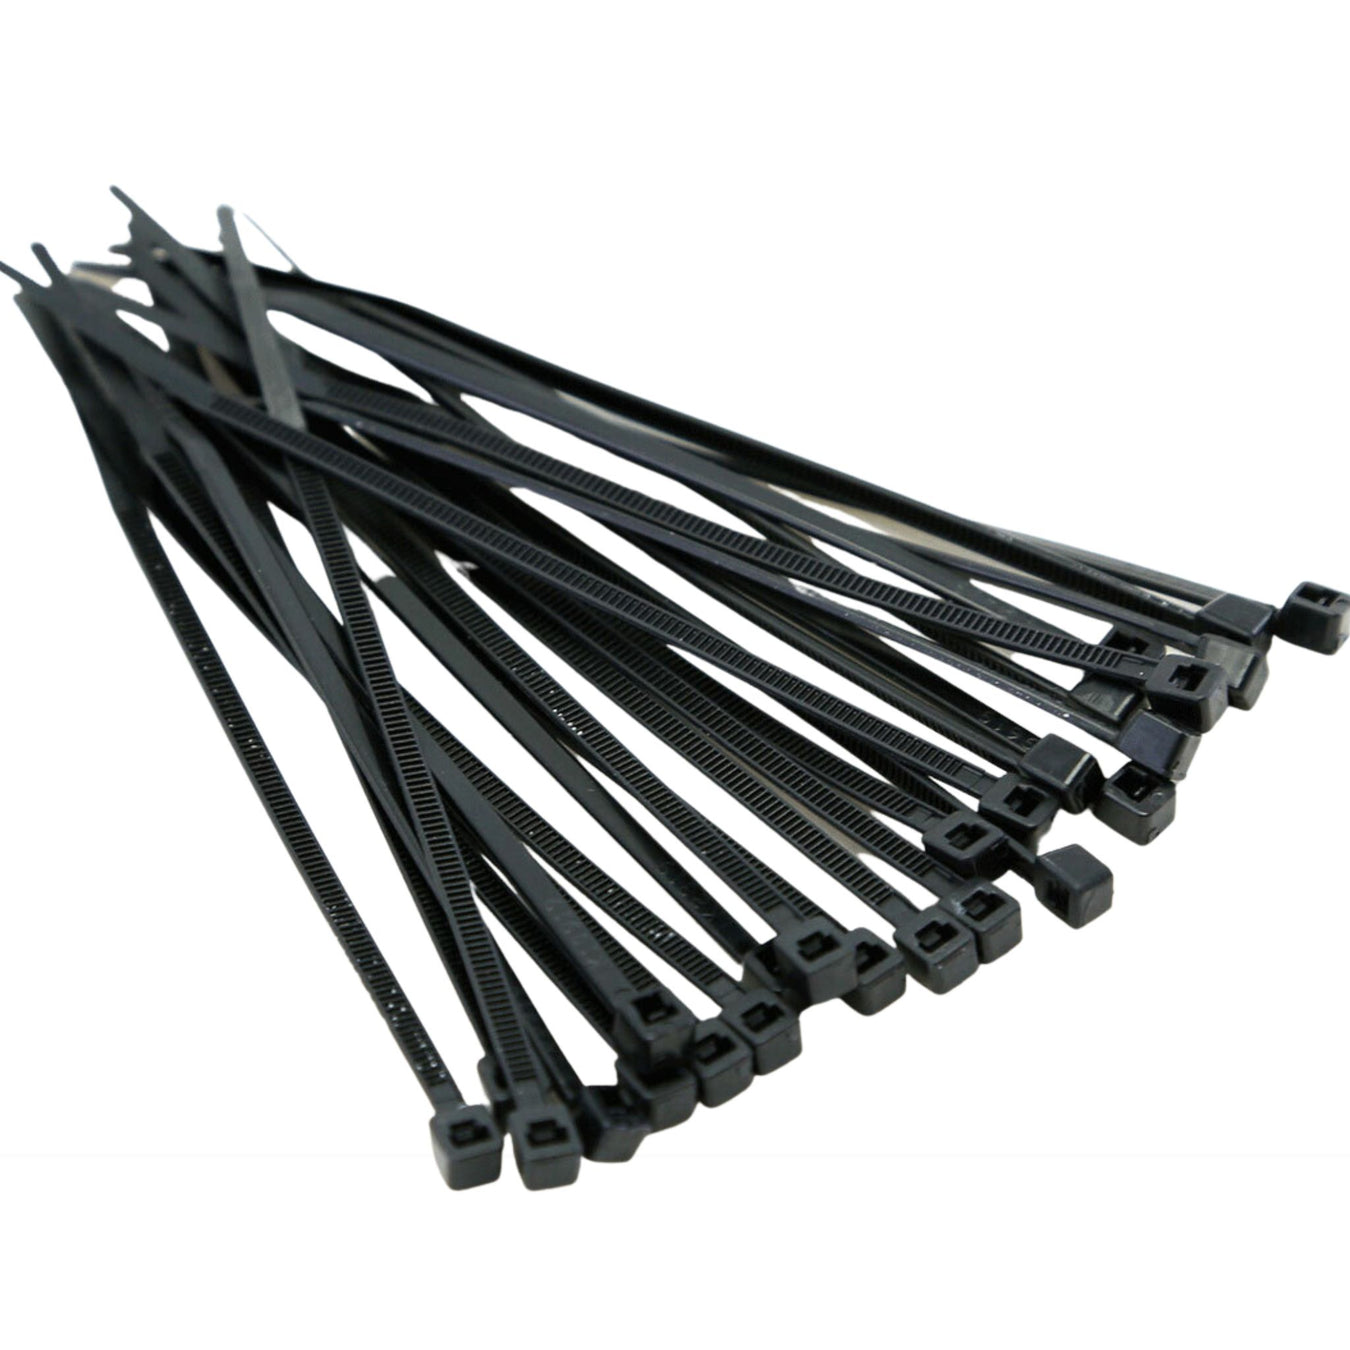 Cable Ties, P Clips & Saddles